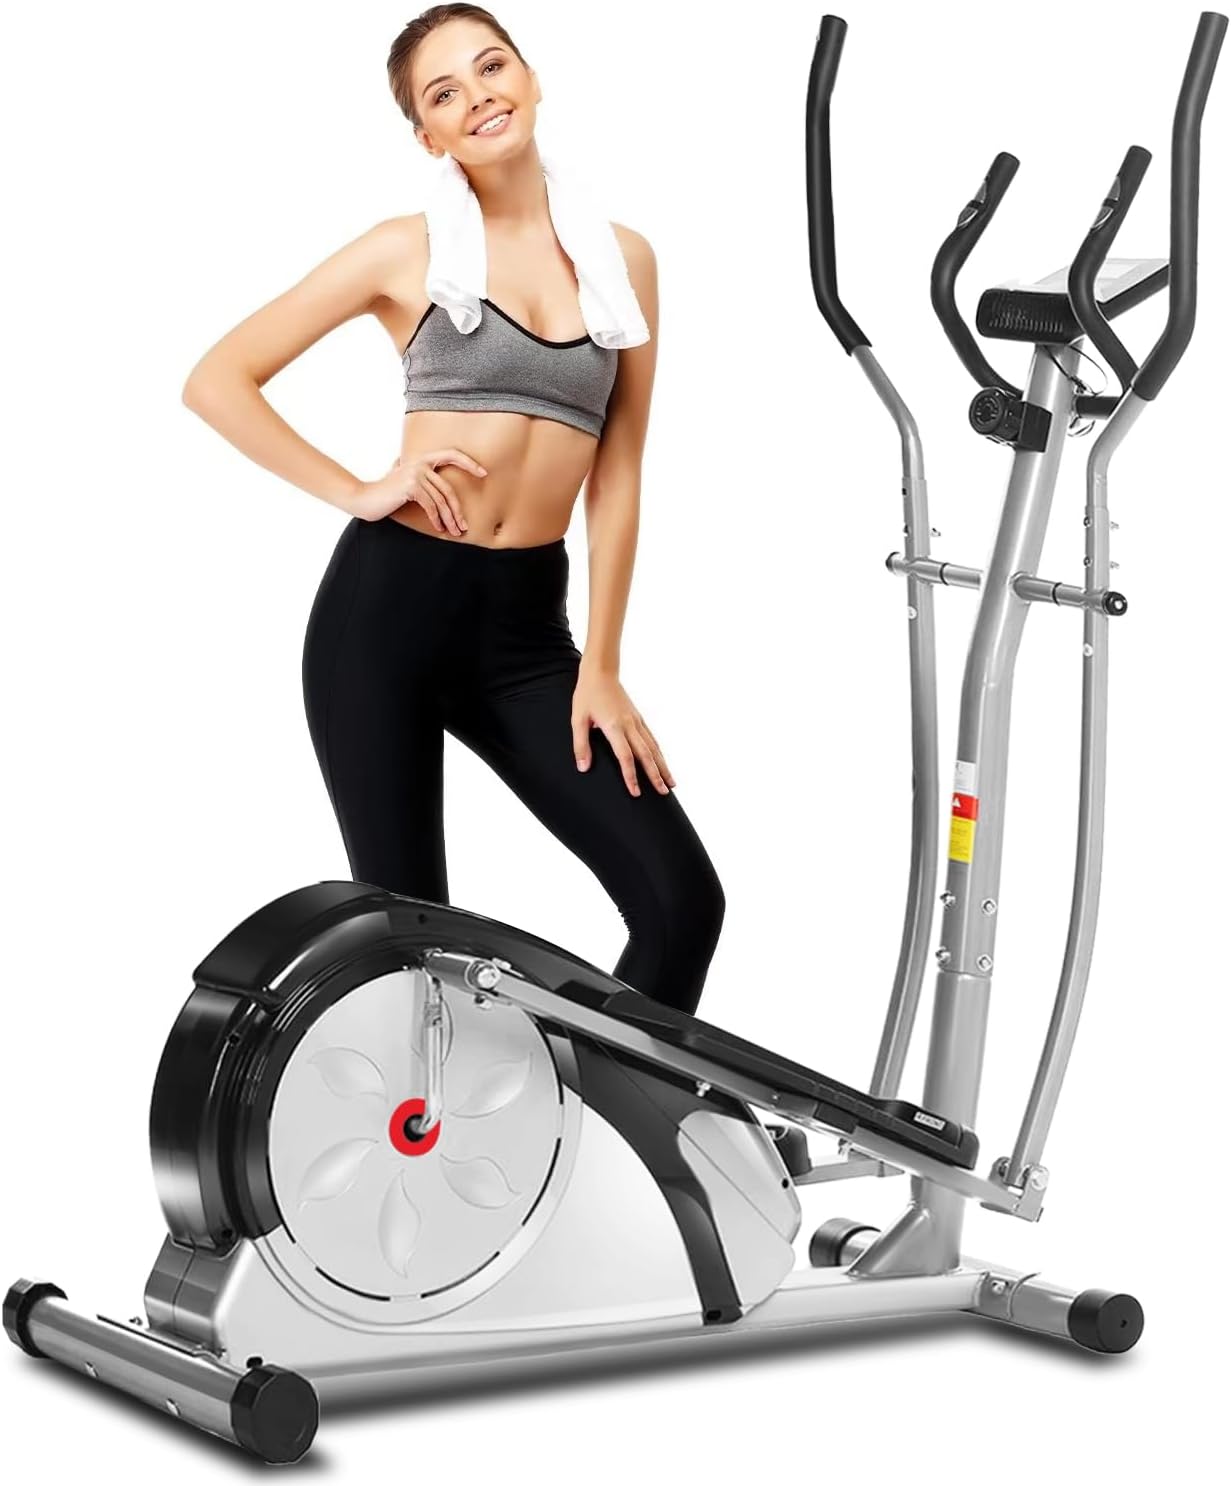 Ancheer 8 Levels Magnetic Resistance Elliptical,350lbs Max Load Training Machines,Smooth Quiet Driven Elliptical For Home Gym Office